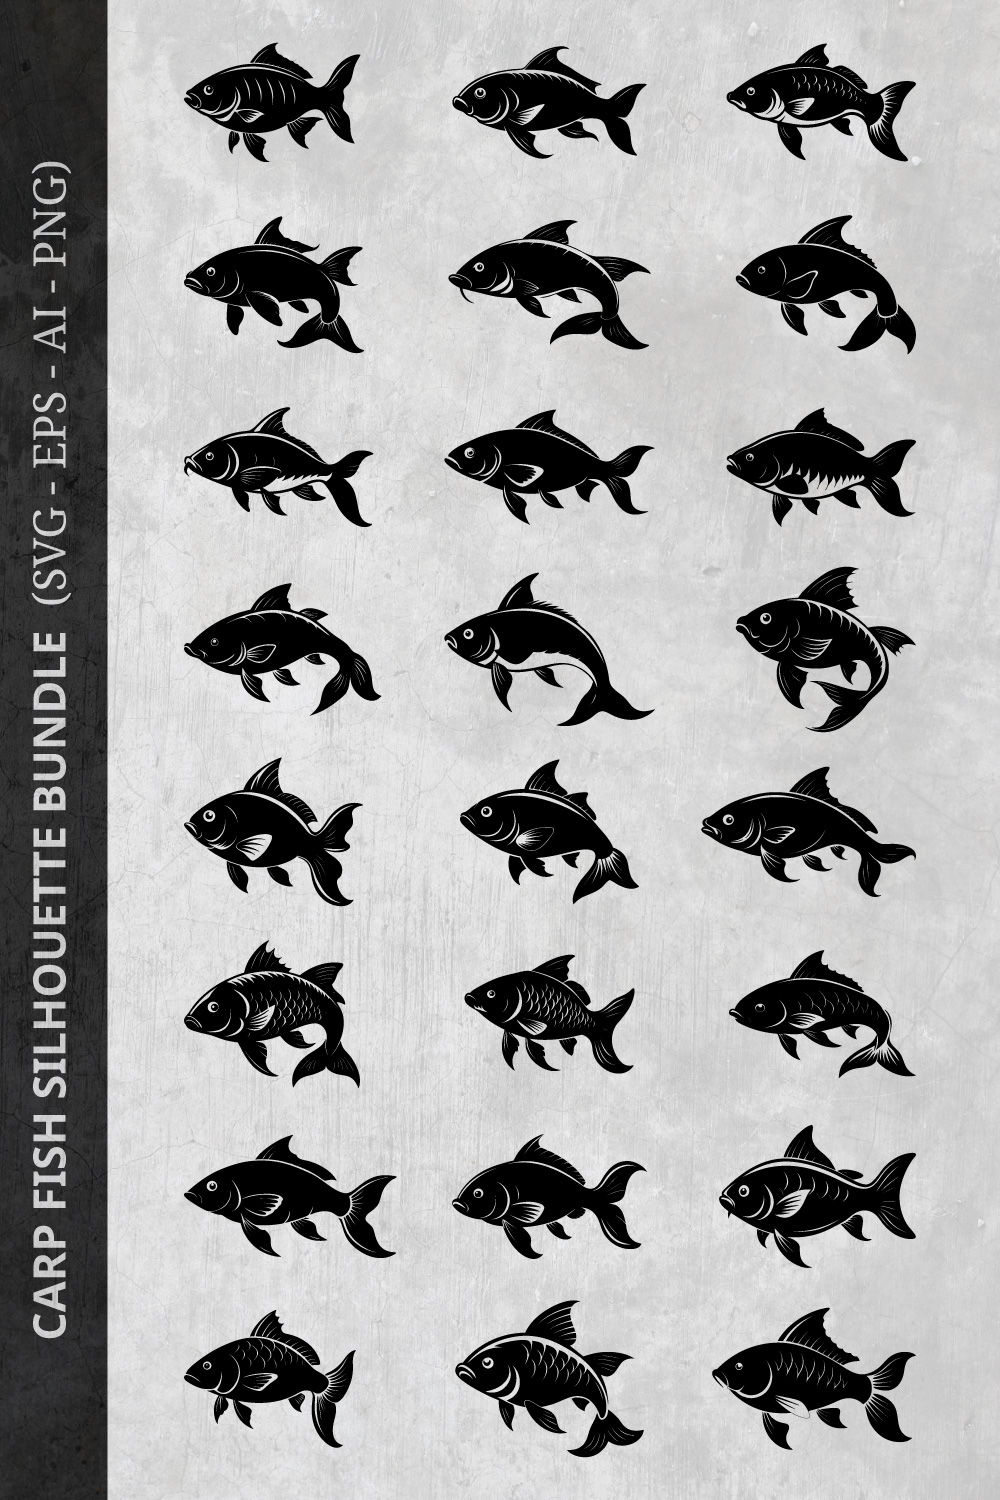 Carp fish silhouette design bundle set with white background pinterest preview image.